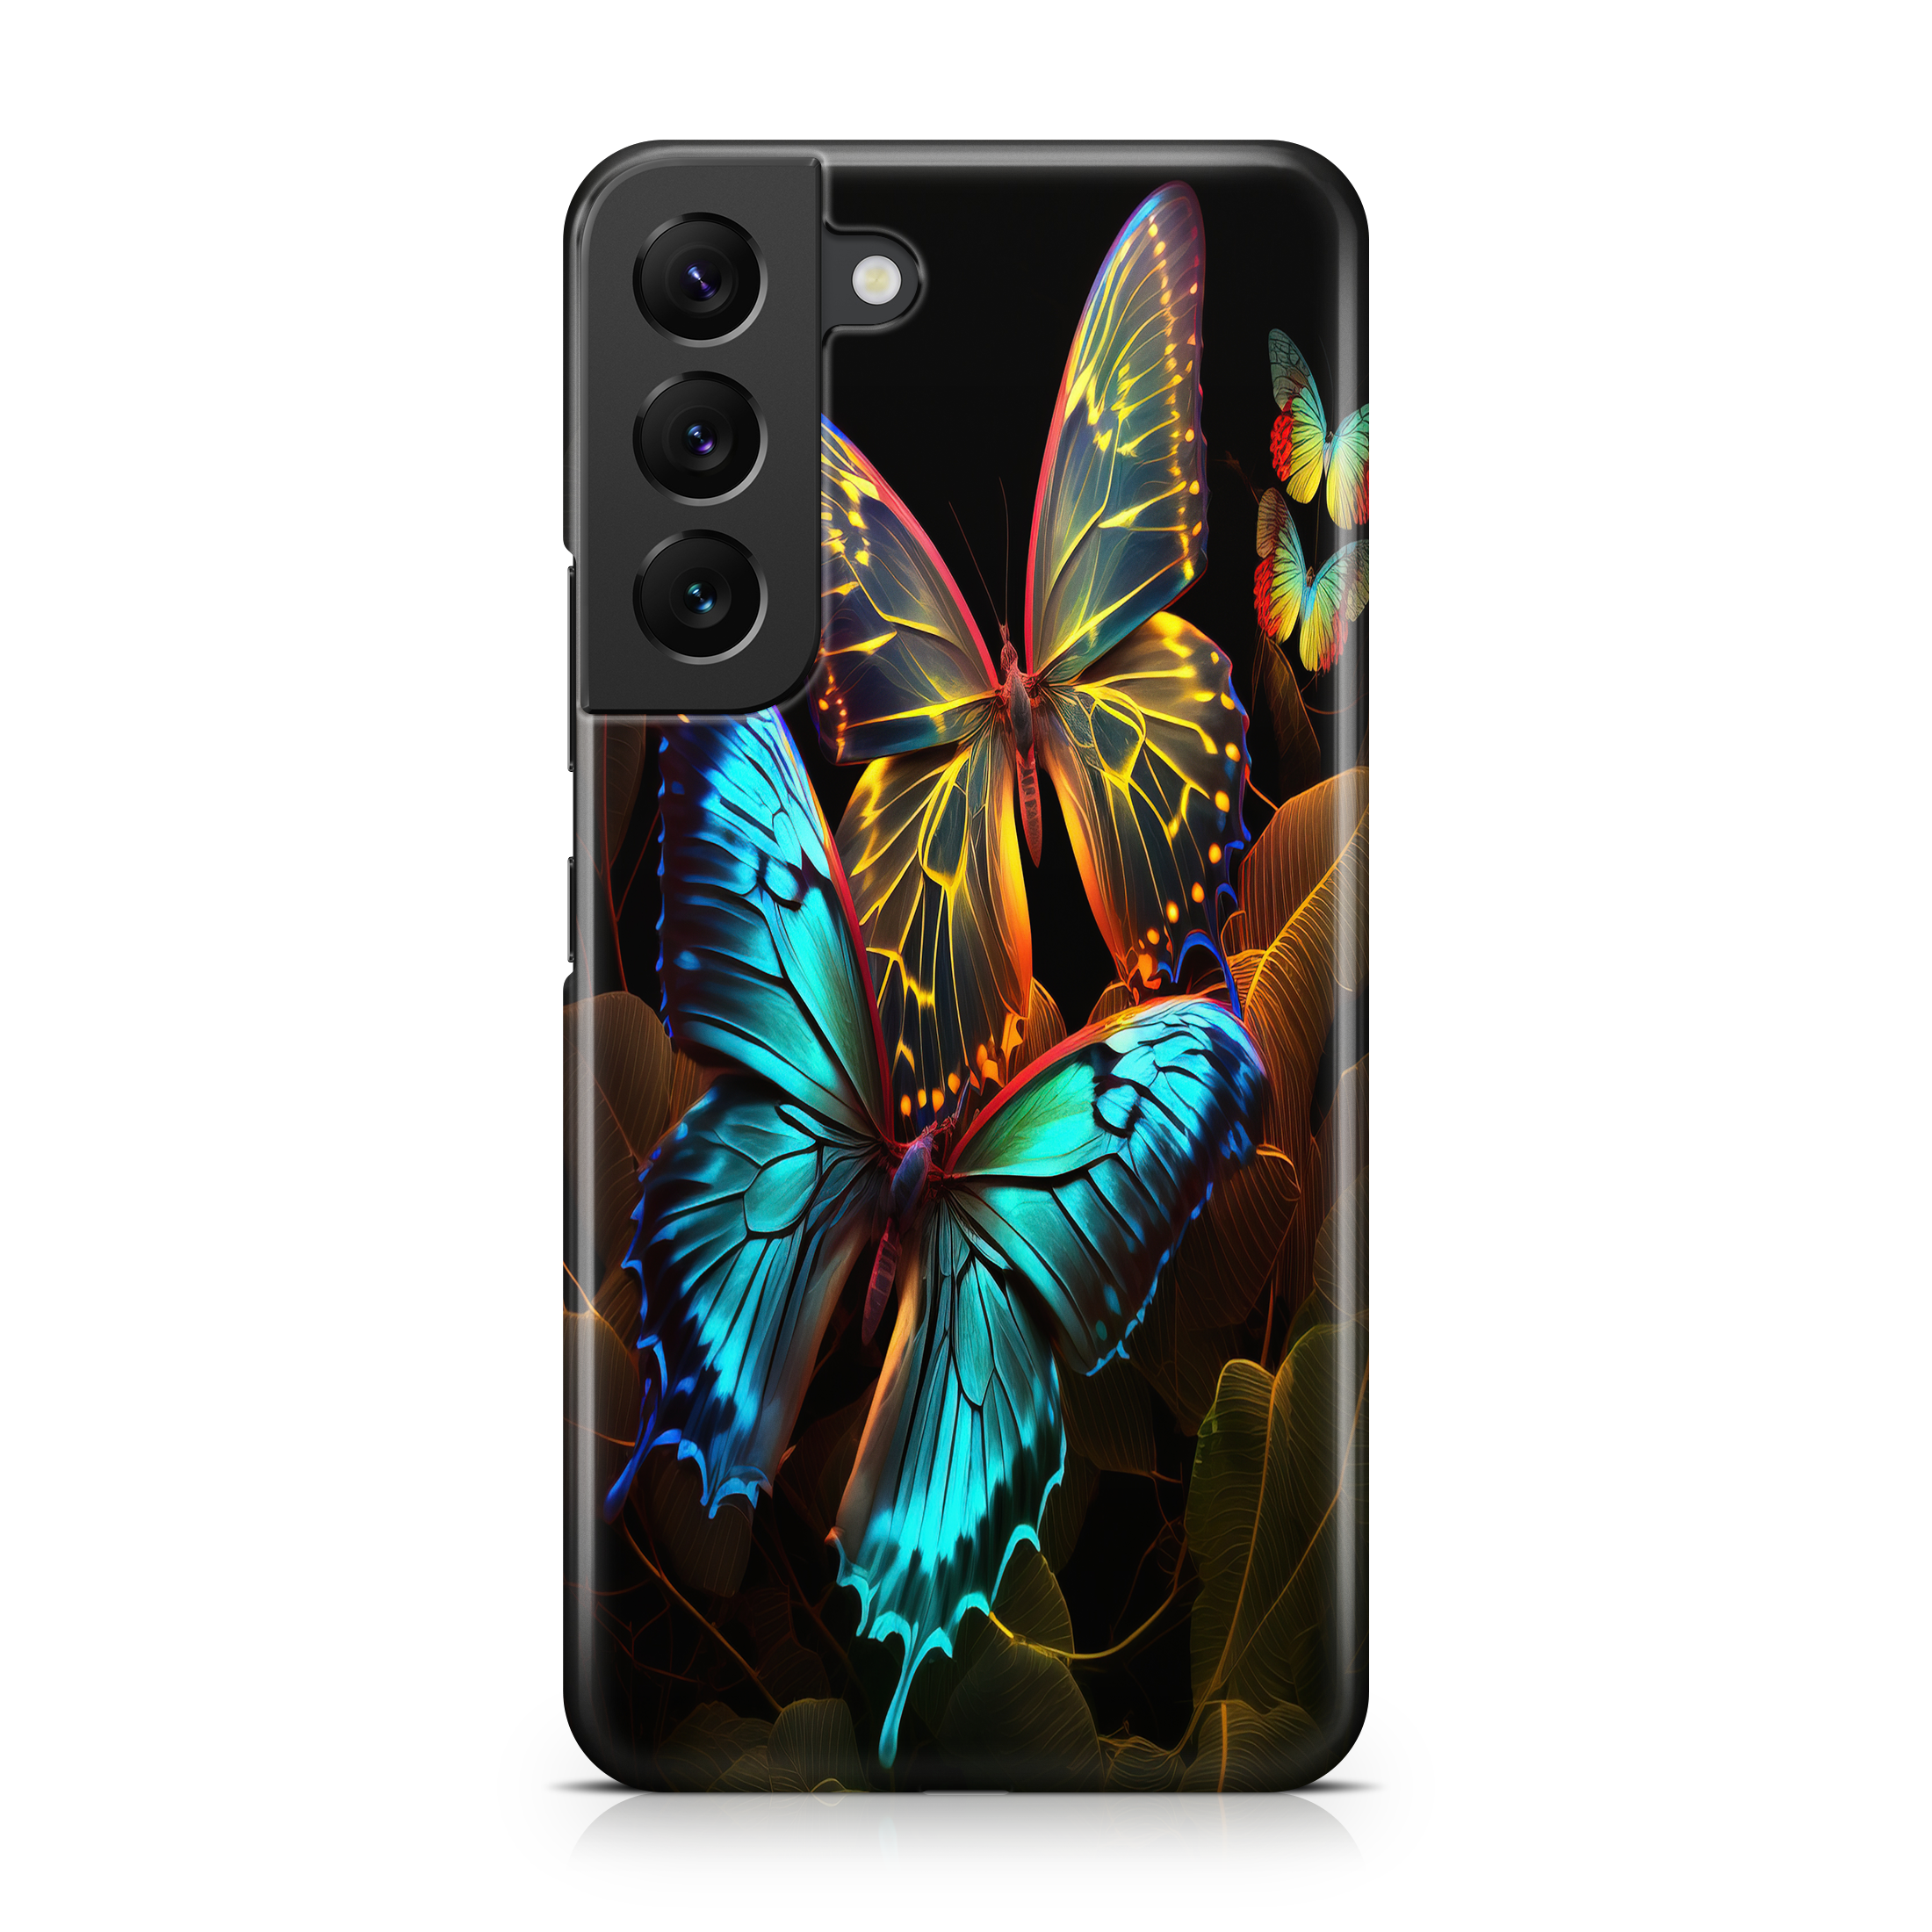 Specter Butterflies - Samsung phone case designs by CaseSwagger